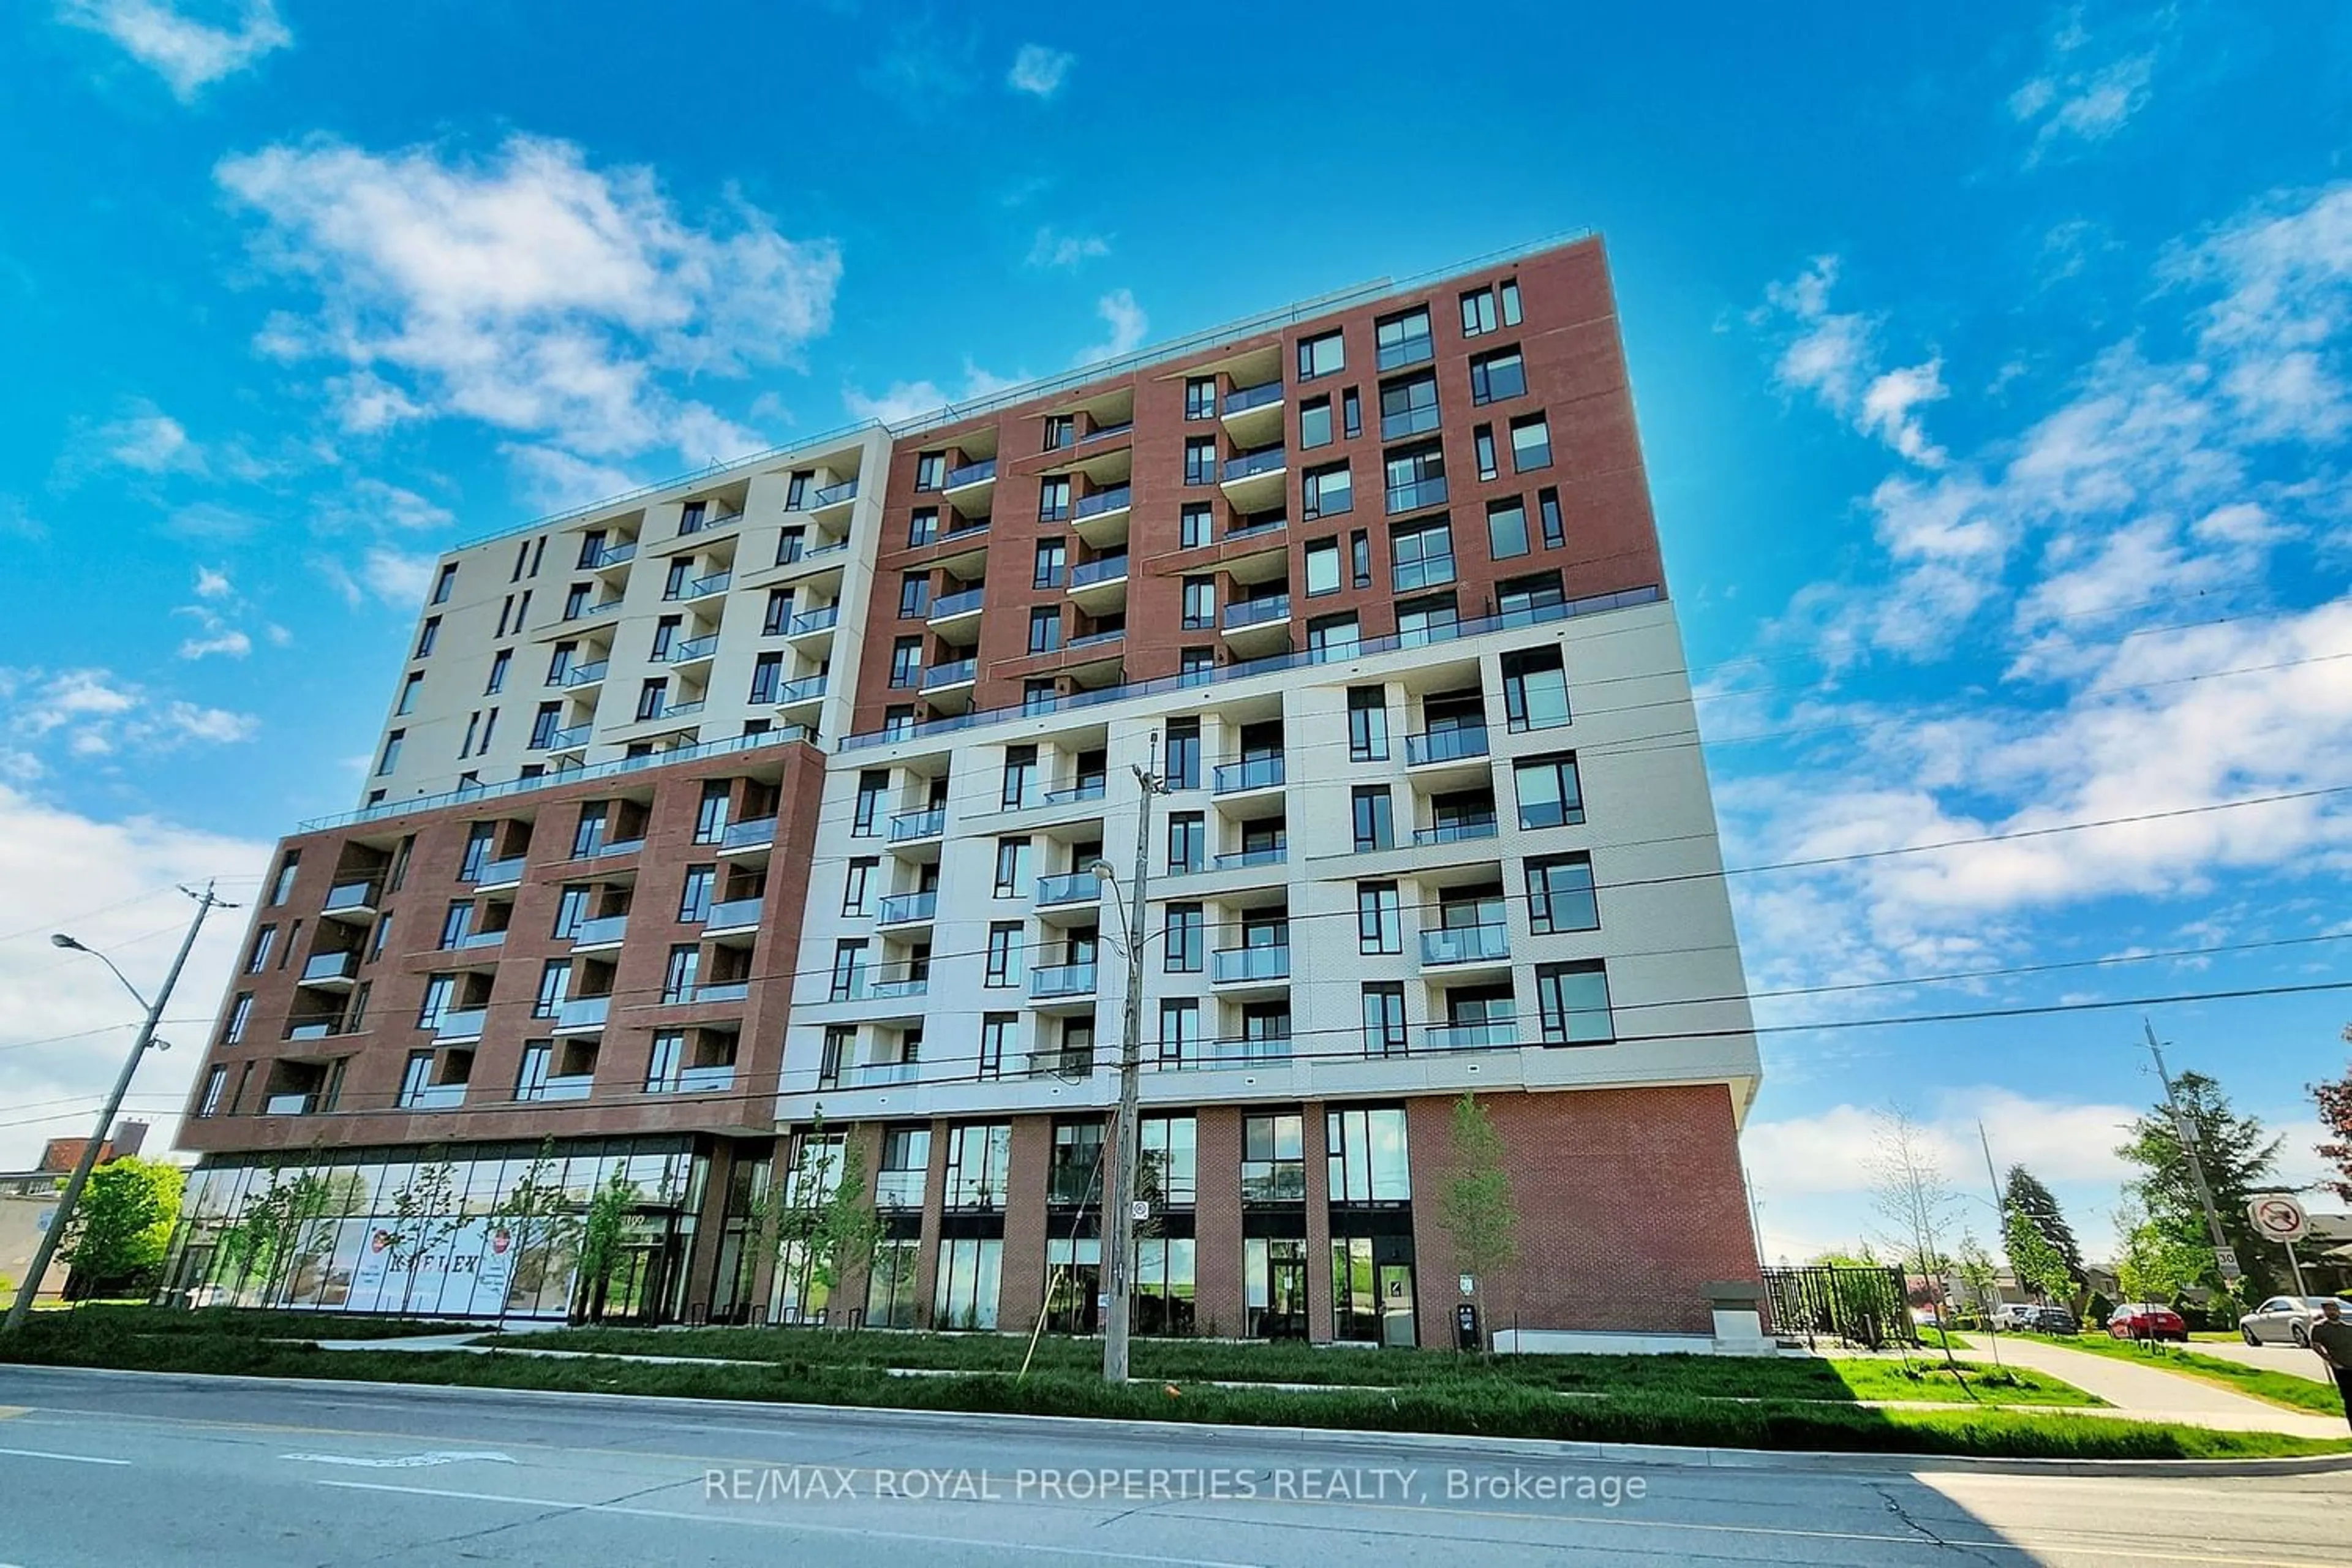 A pic from exterior of the house or condo for 3100 Keele St #341, Toronto Ontario M3M 2H4